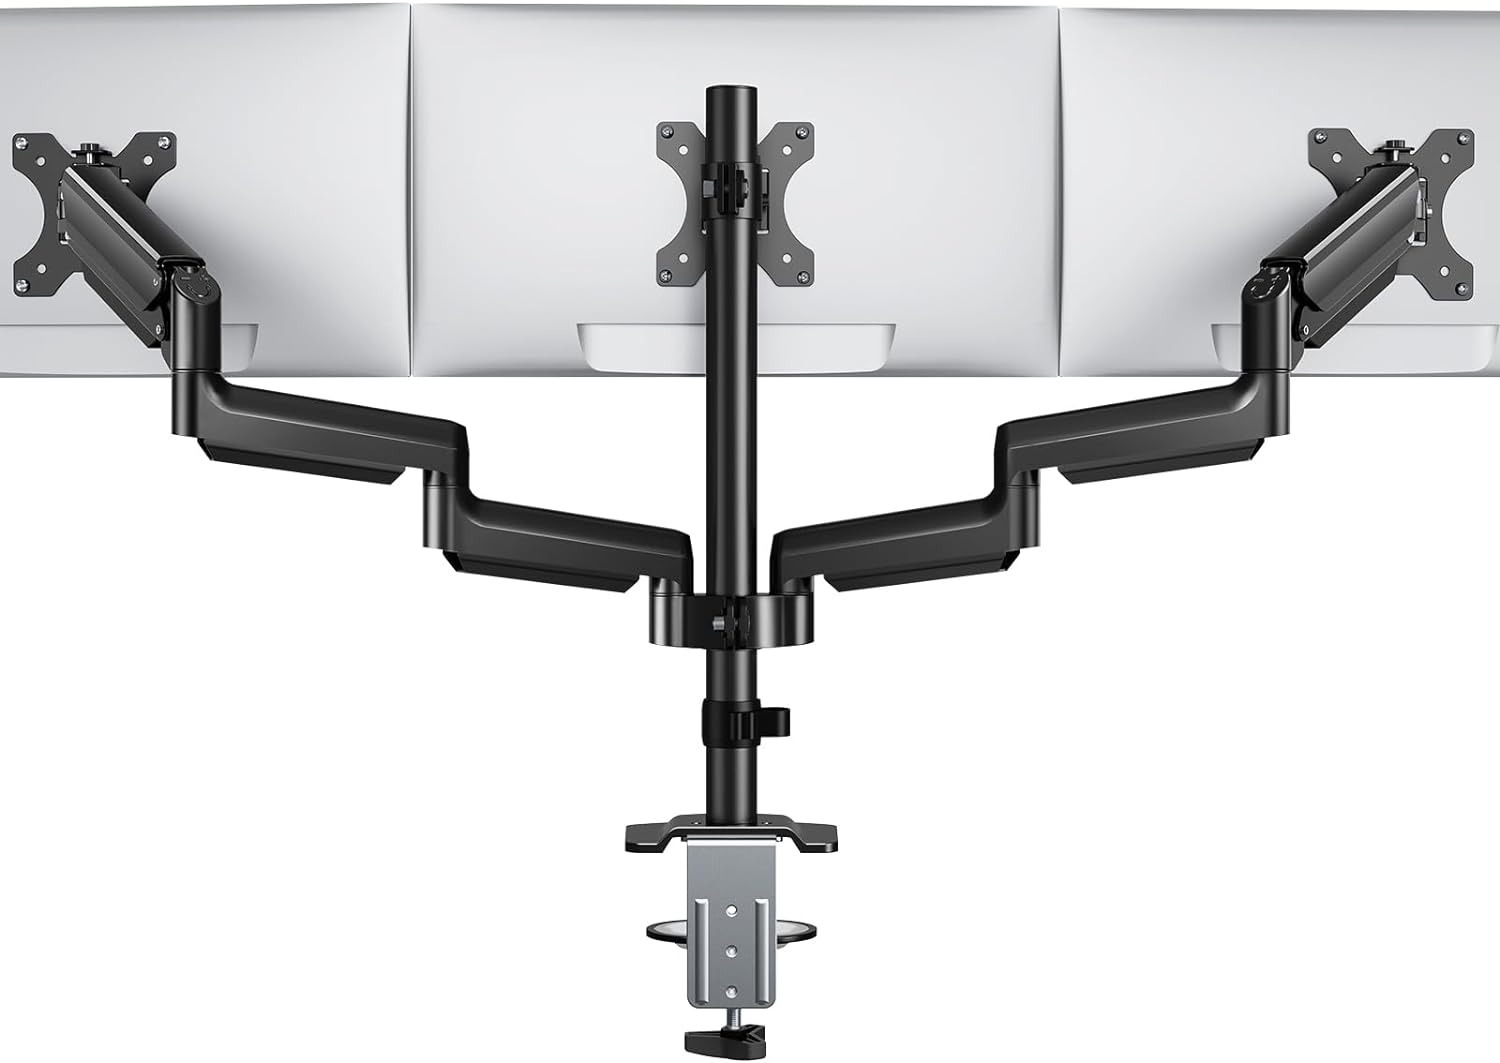 HUANUO Triple Monitor Mount for 13" to 27" Computer Screens $49.49 + Free Shipping